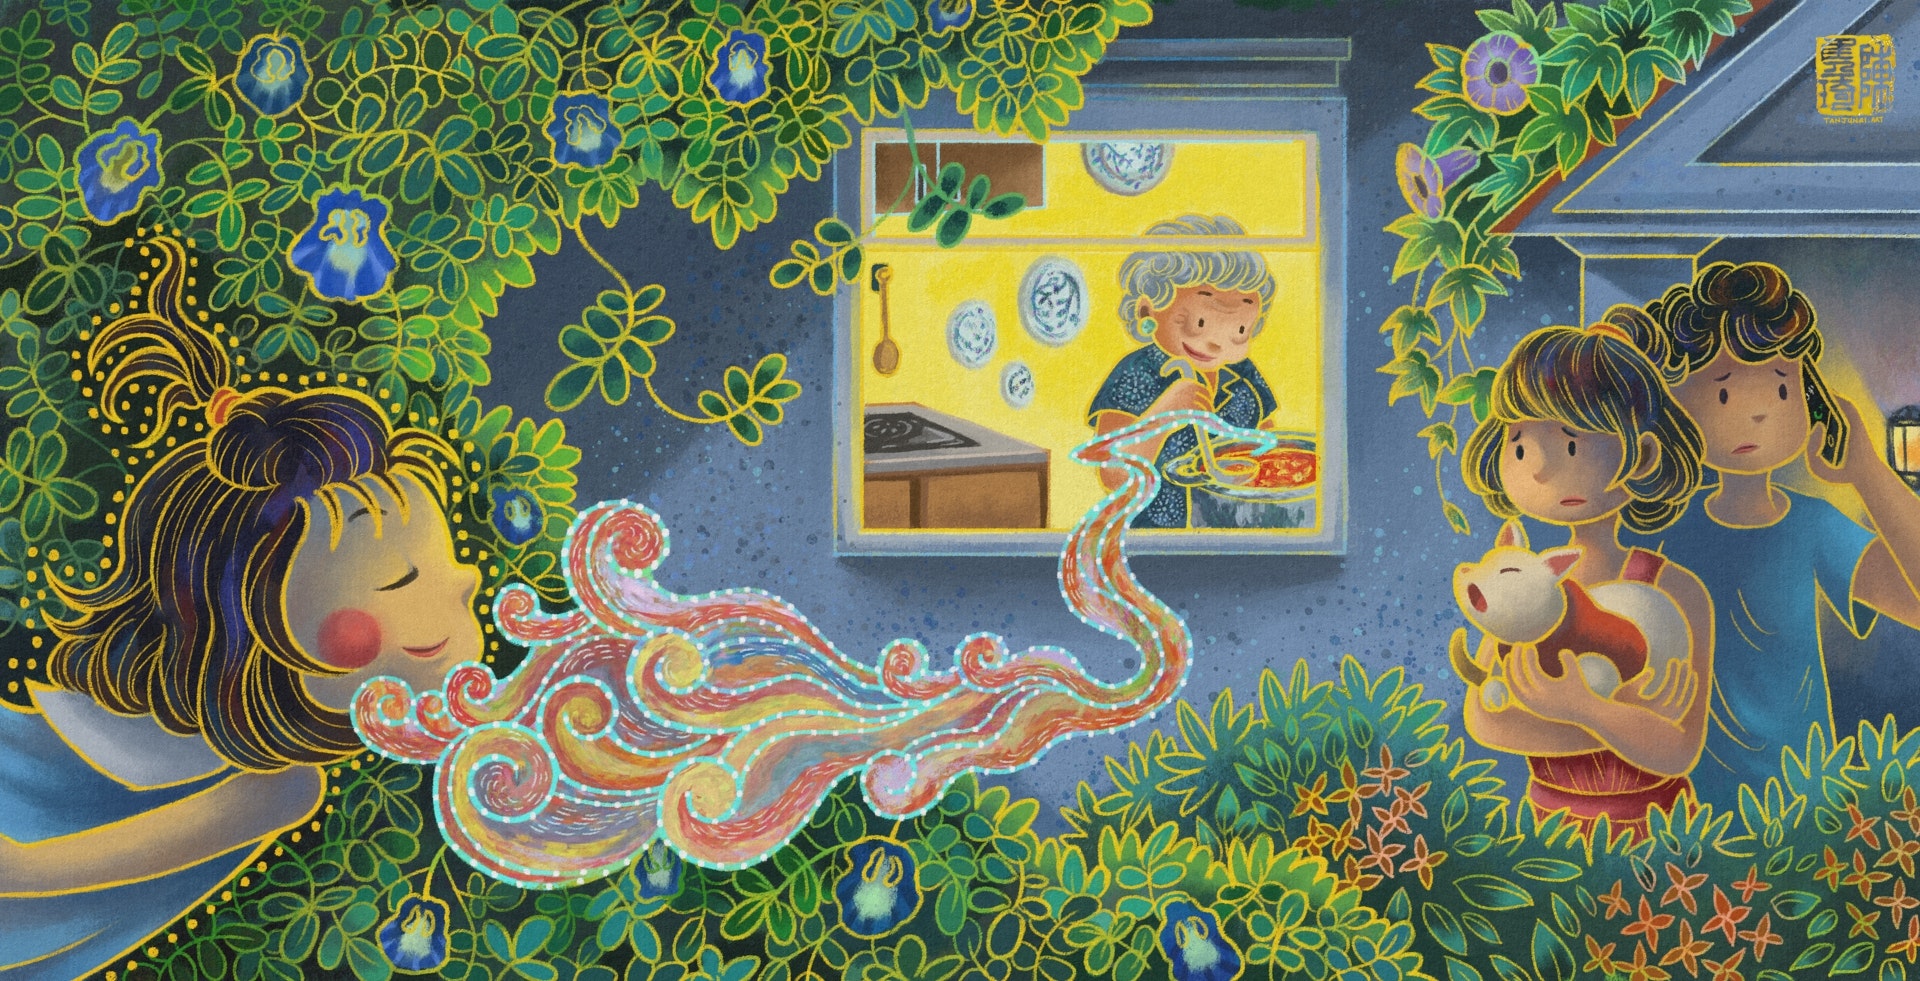 Digital painting with chalk texture and batik-inspired style and motifs, of a young girl with short curly hair, some tied up in a tuft on her head, floating behind bushes of blue pea flowers, following a scent cloud originating from the kitchen of her house where her grandma is cooking curry. Her mother, father, and their pet cat are standing at the front porch looking worried.